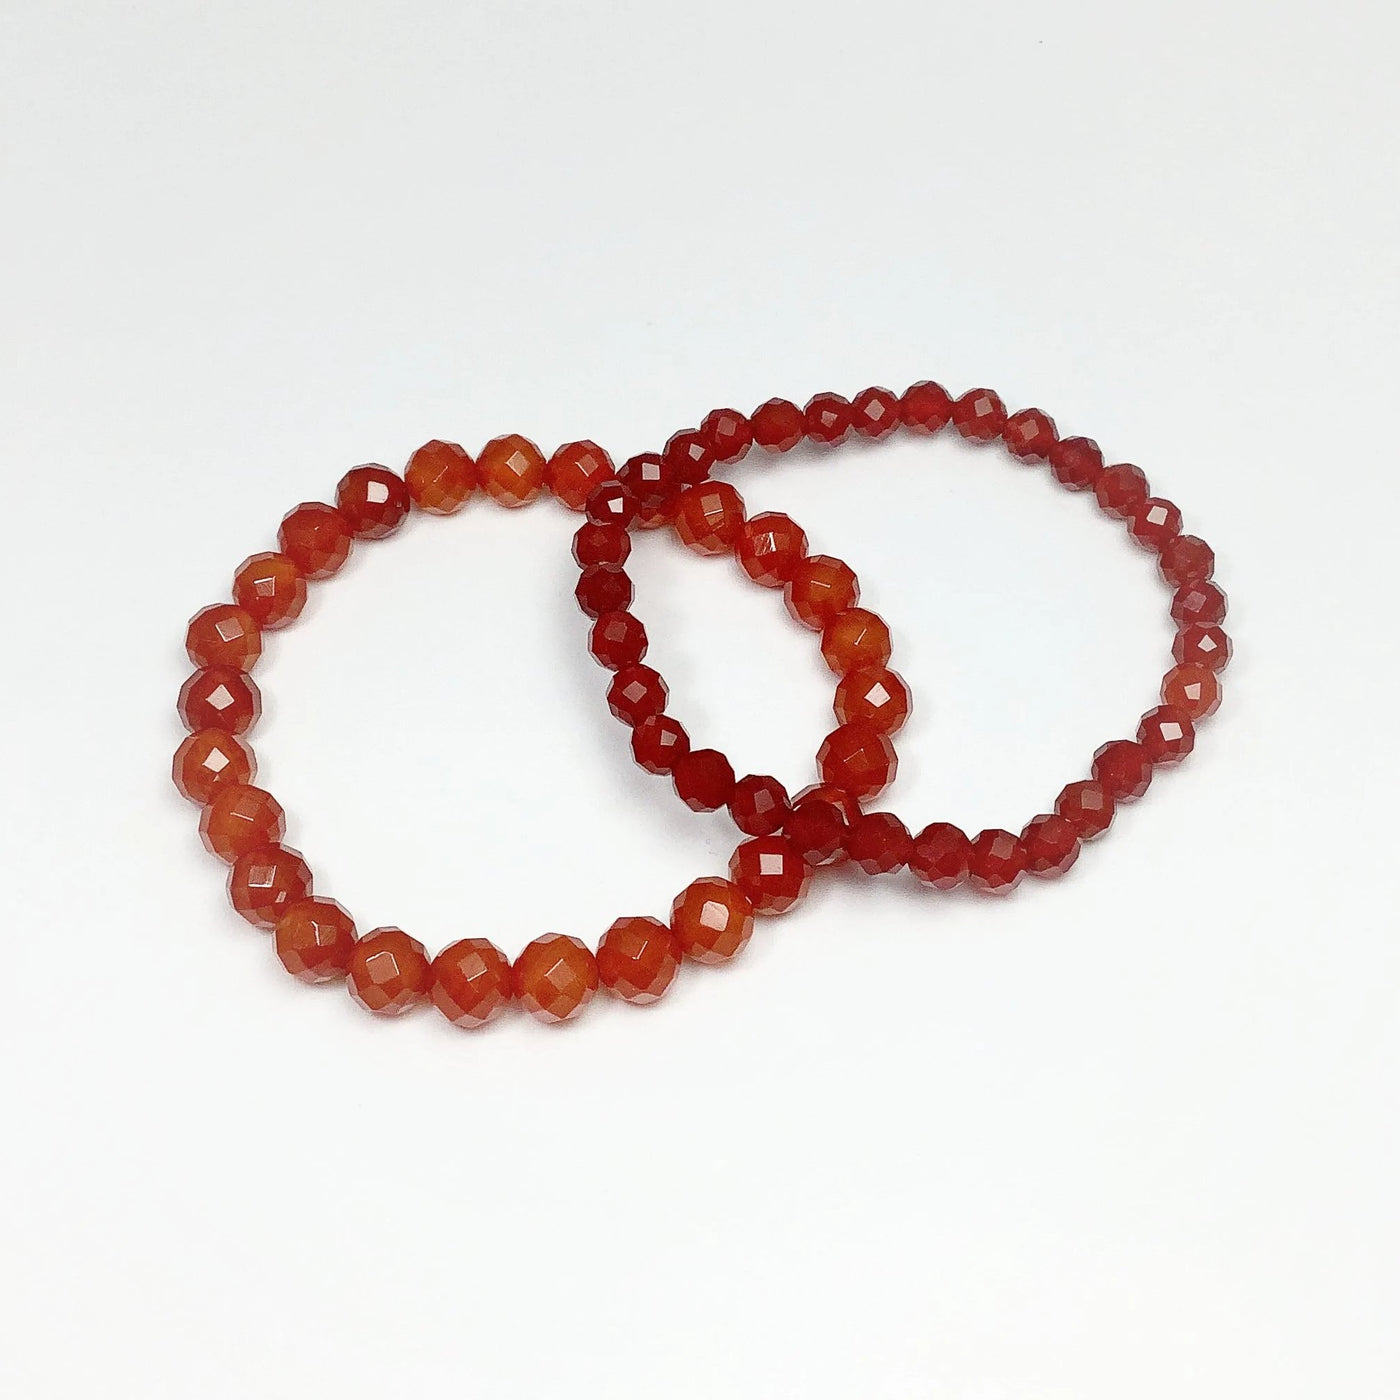 Carnelian Agate Faceted Beaded Bracelet - High Quality